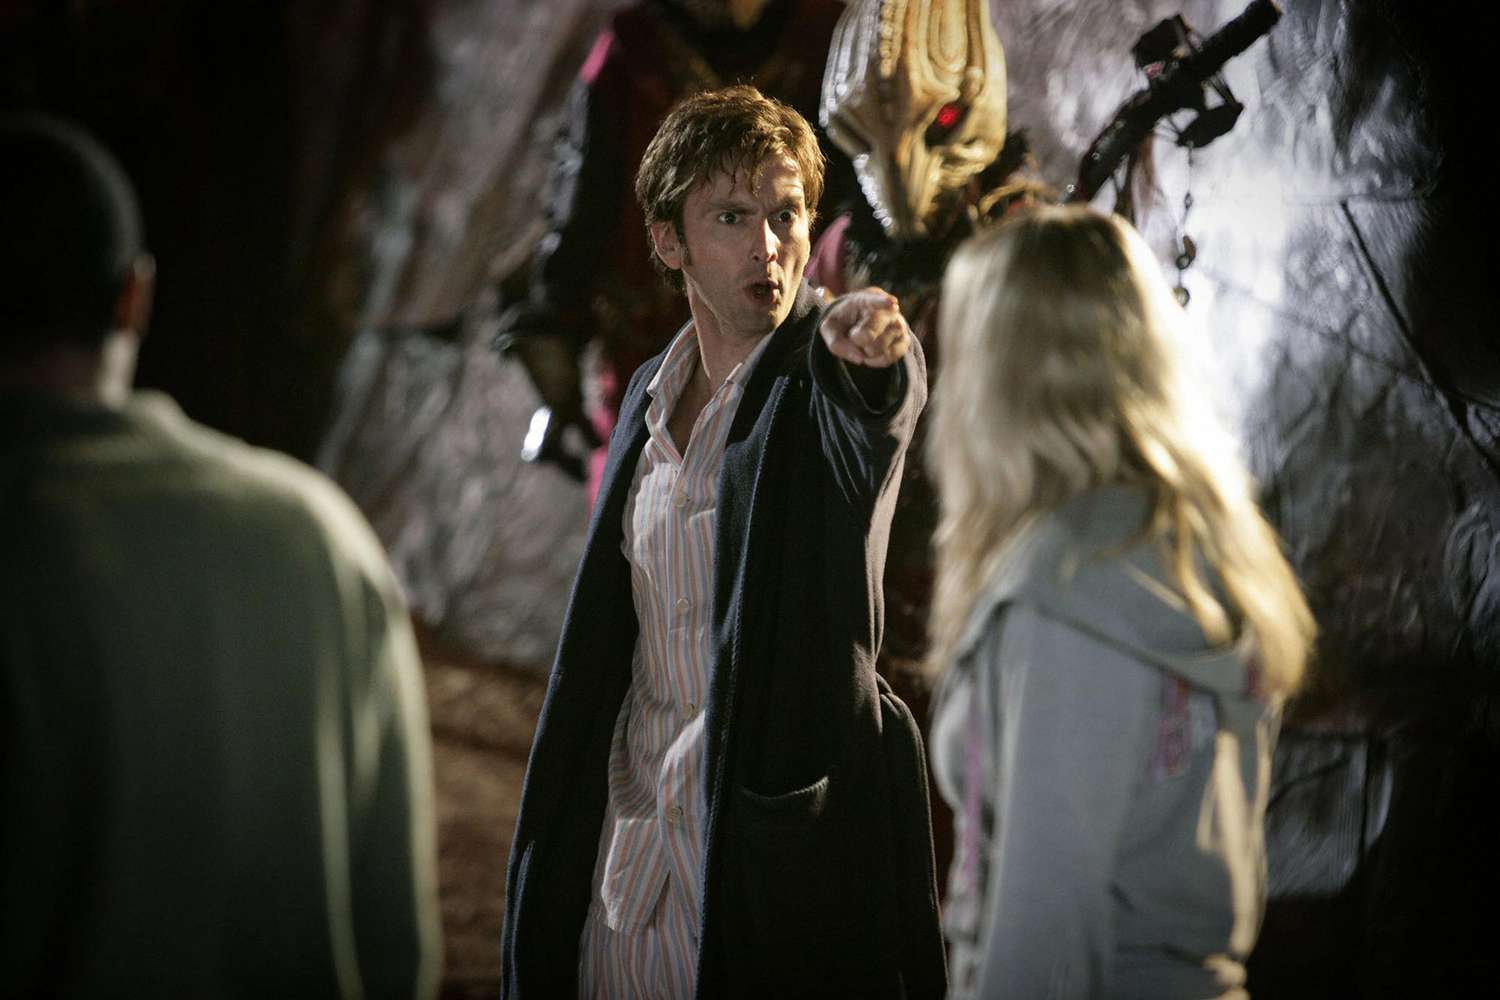 Doctor Who The Christmas Invasion